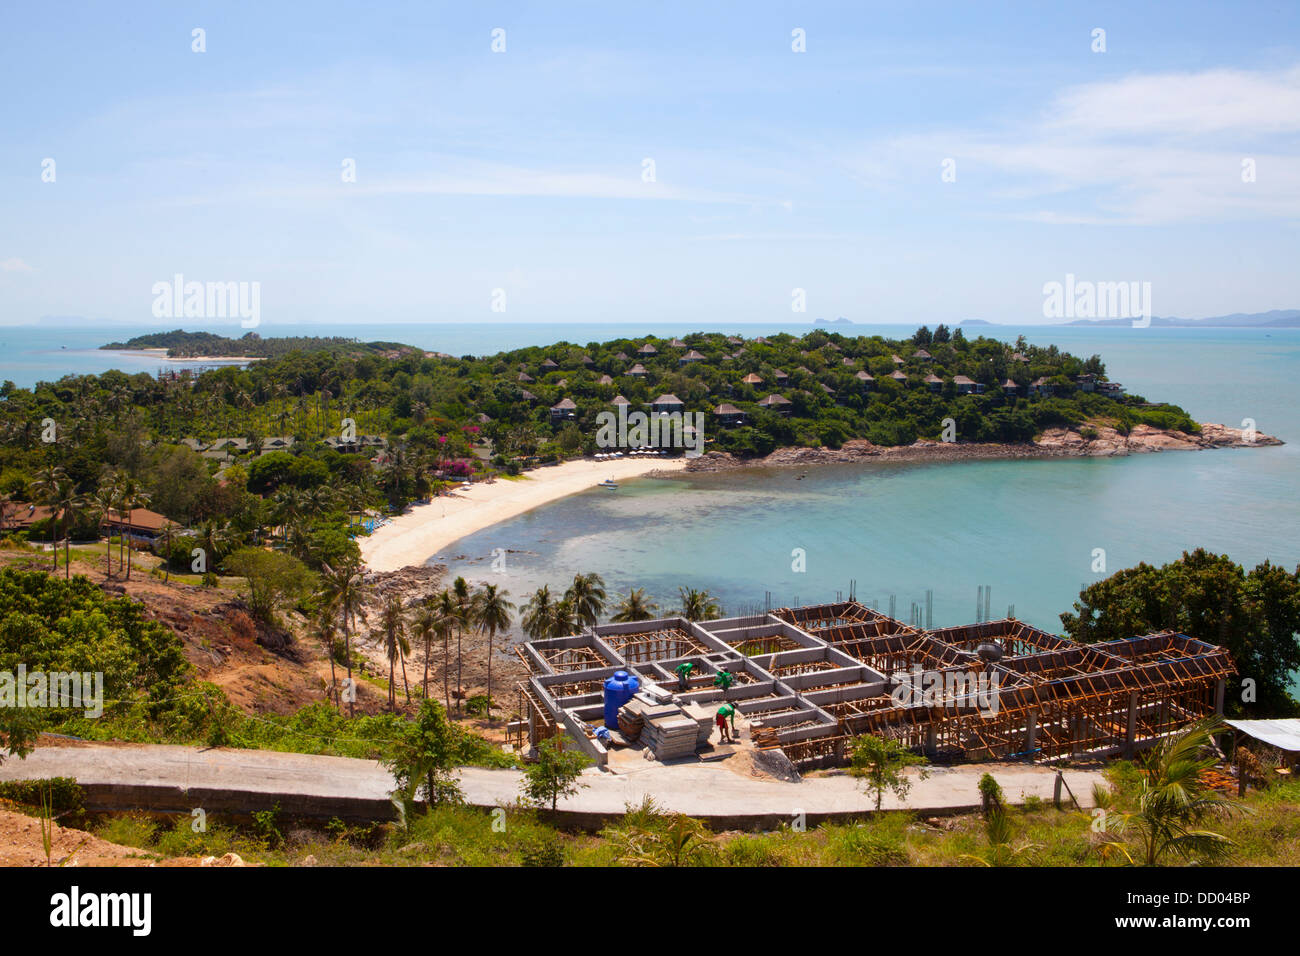 Beaches on the north of Ko Samui Island in the Gulf of Thailand. Stock Photo